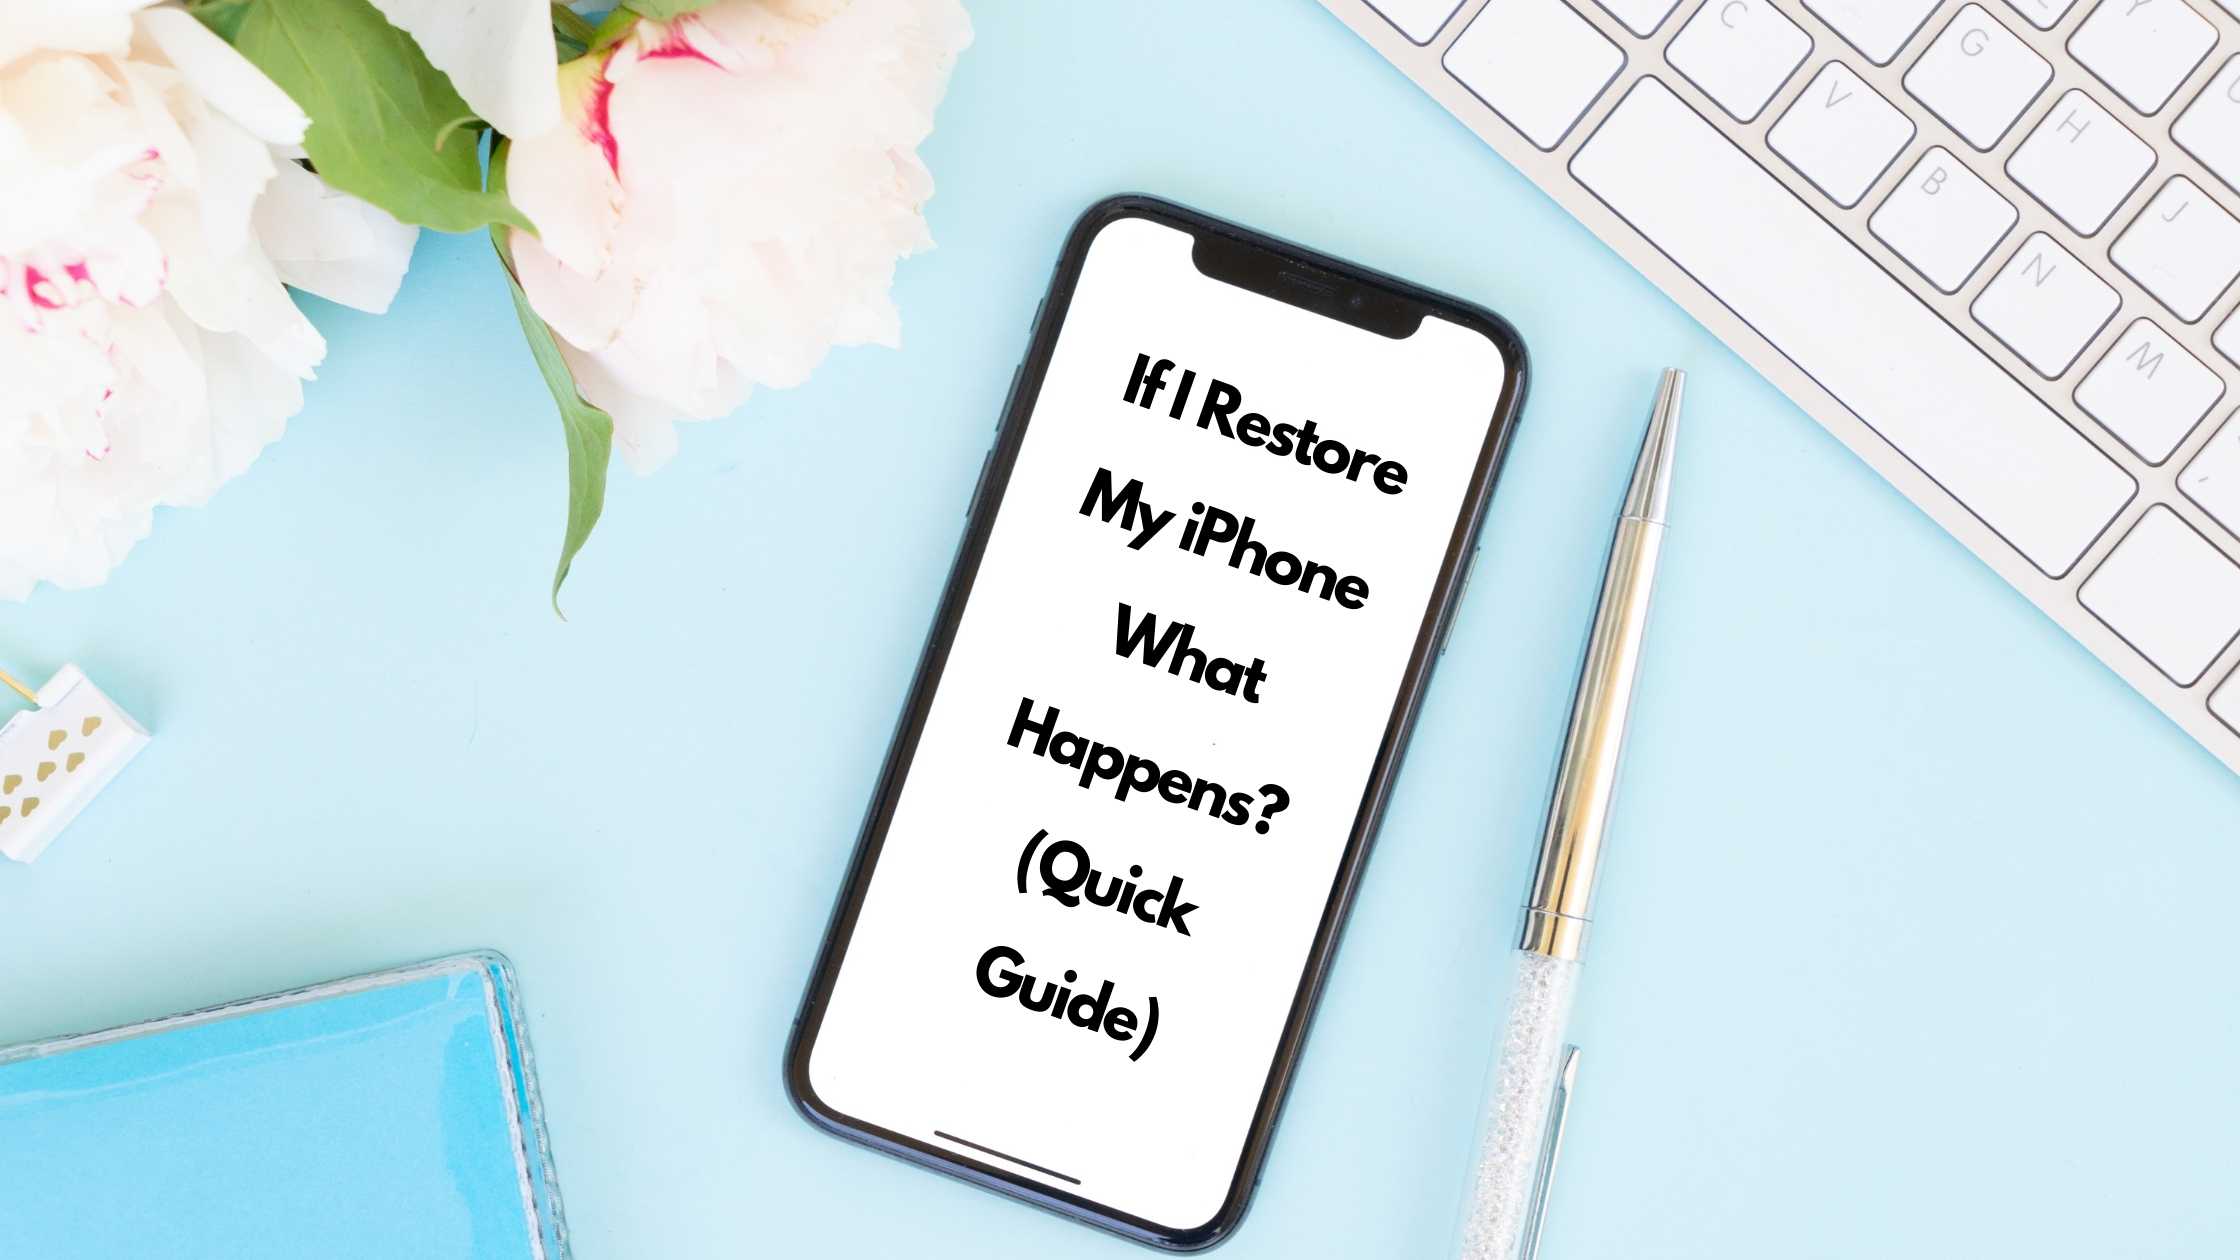 If I Restore My Iphone What Happens Quick Guide